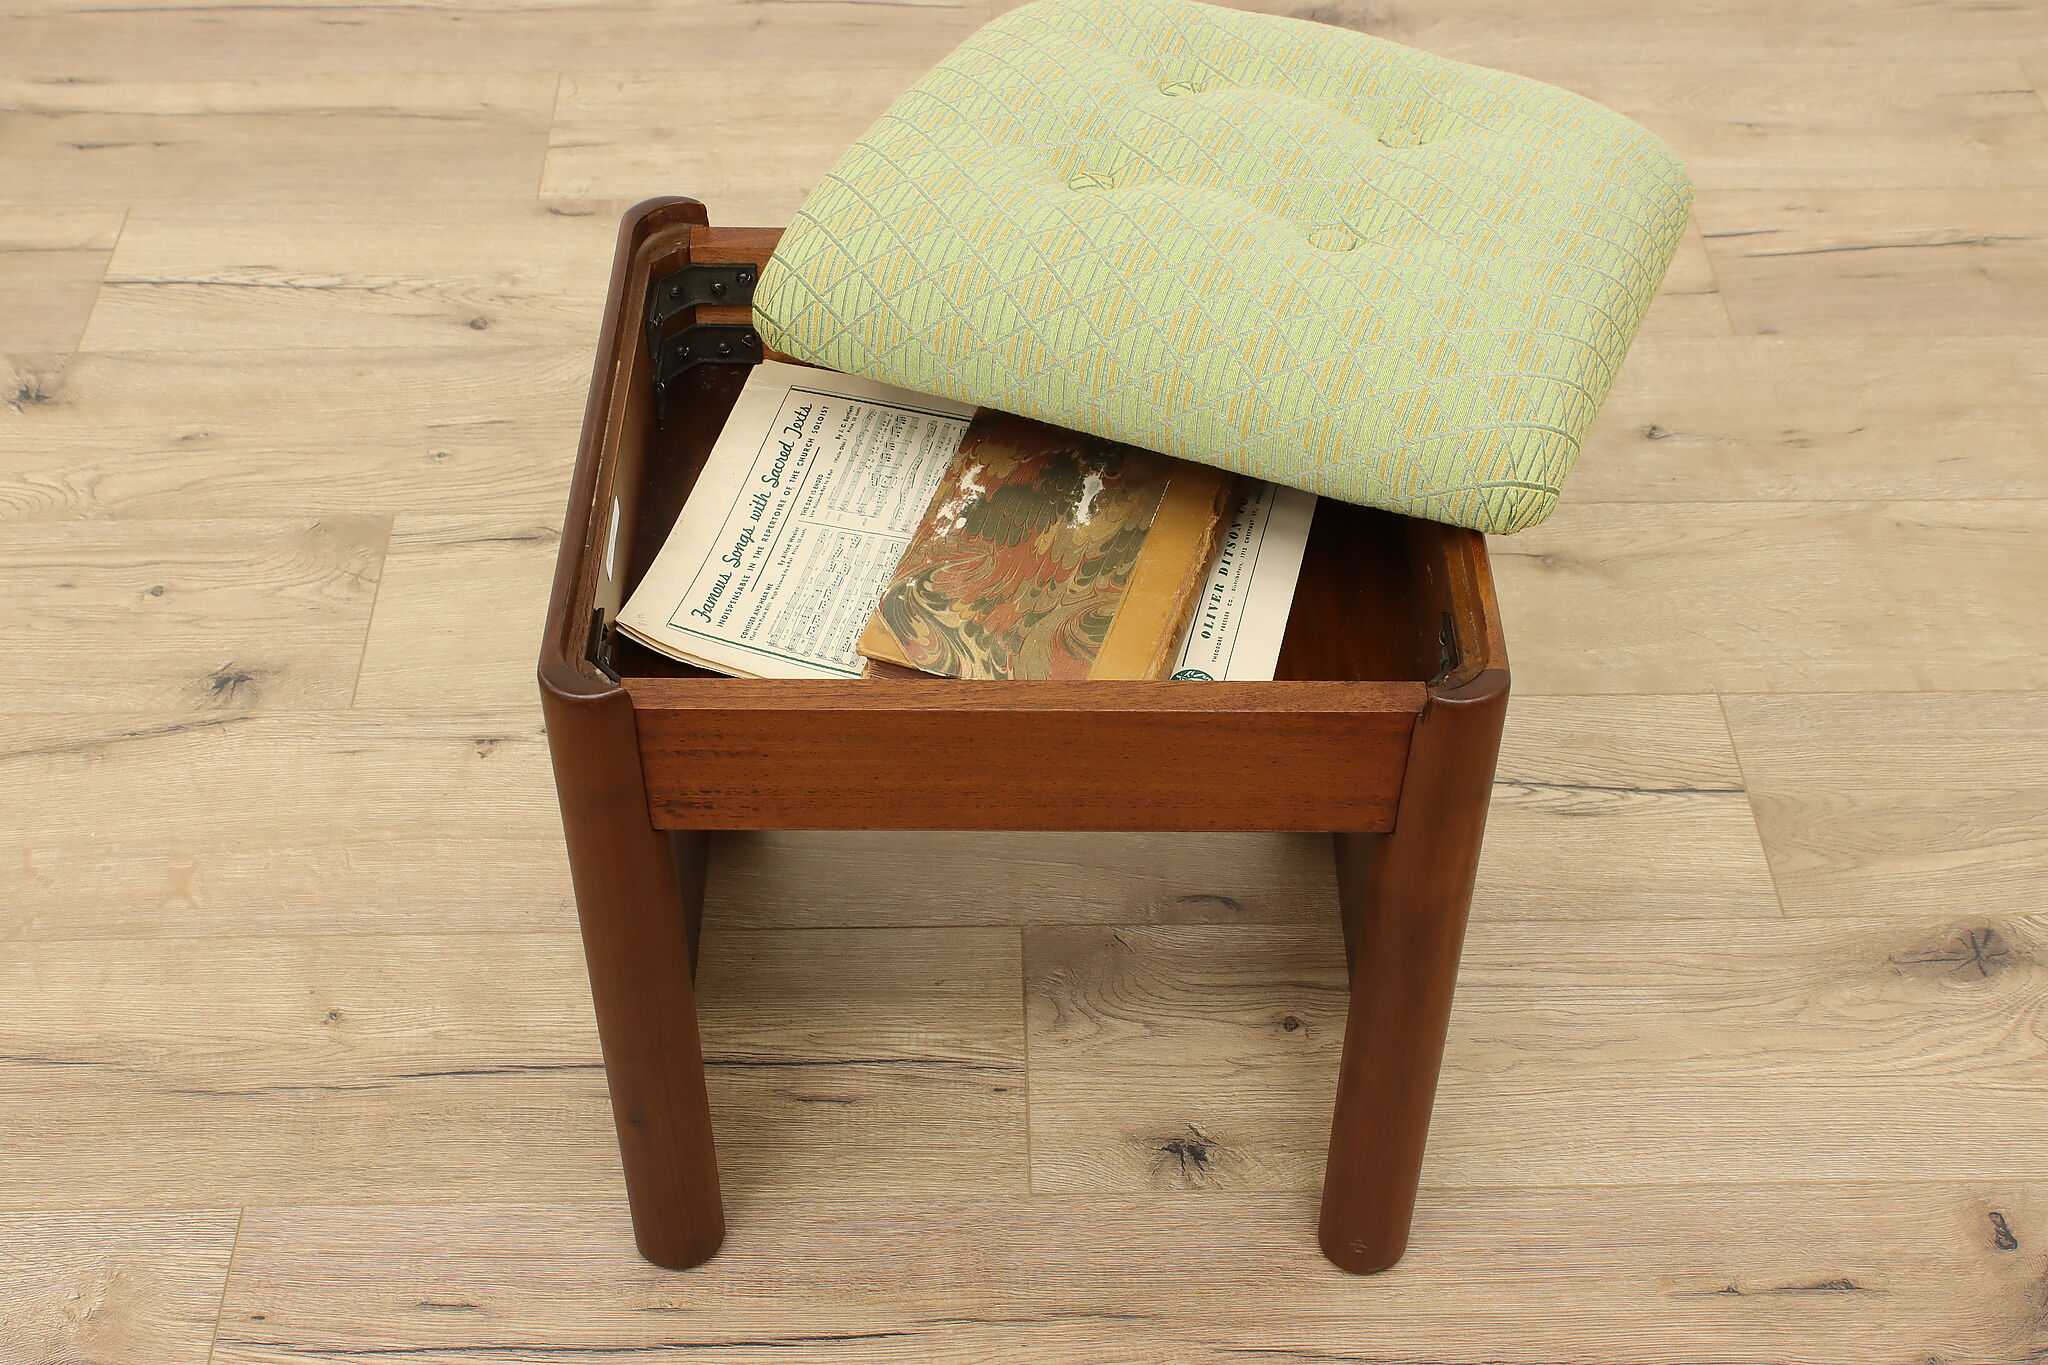 Refurbished Foot Stool - Up-Cycled Vintage Small Foot Rest - Reupholst –  Bixley Shop